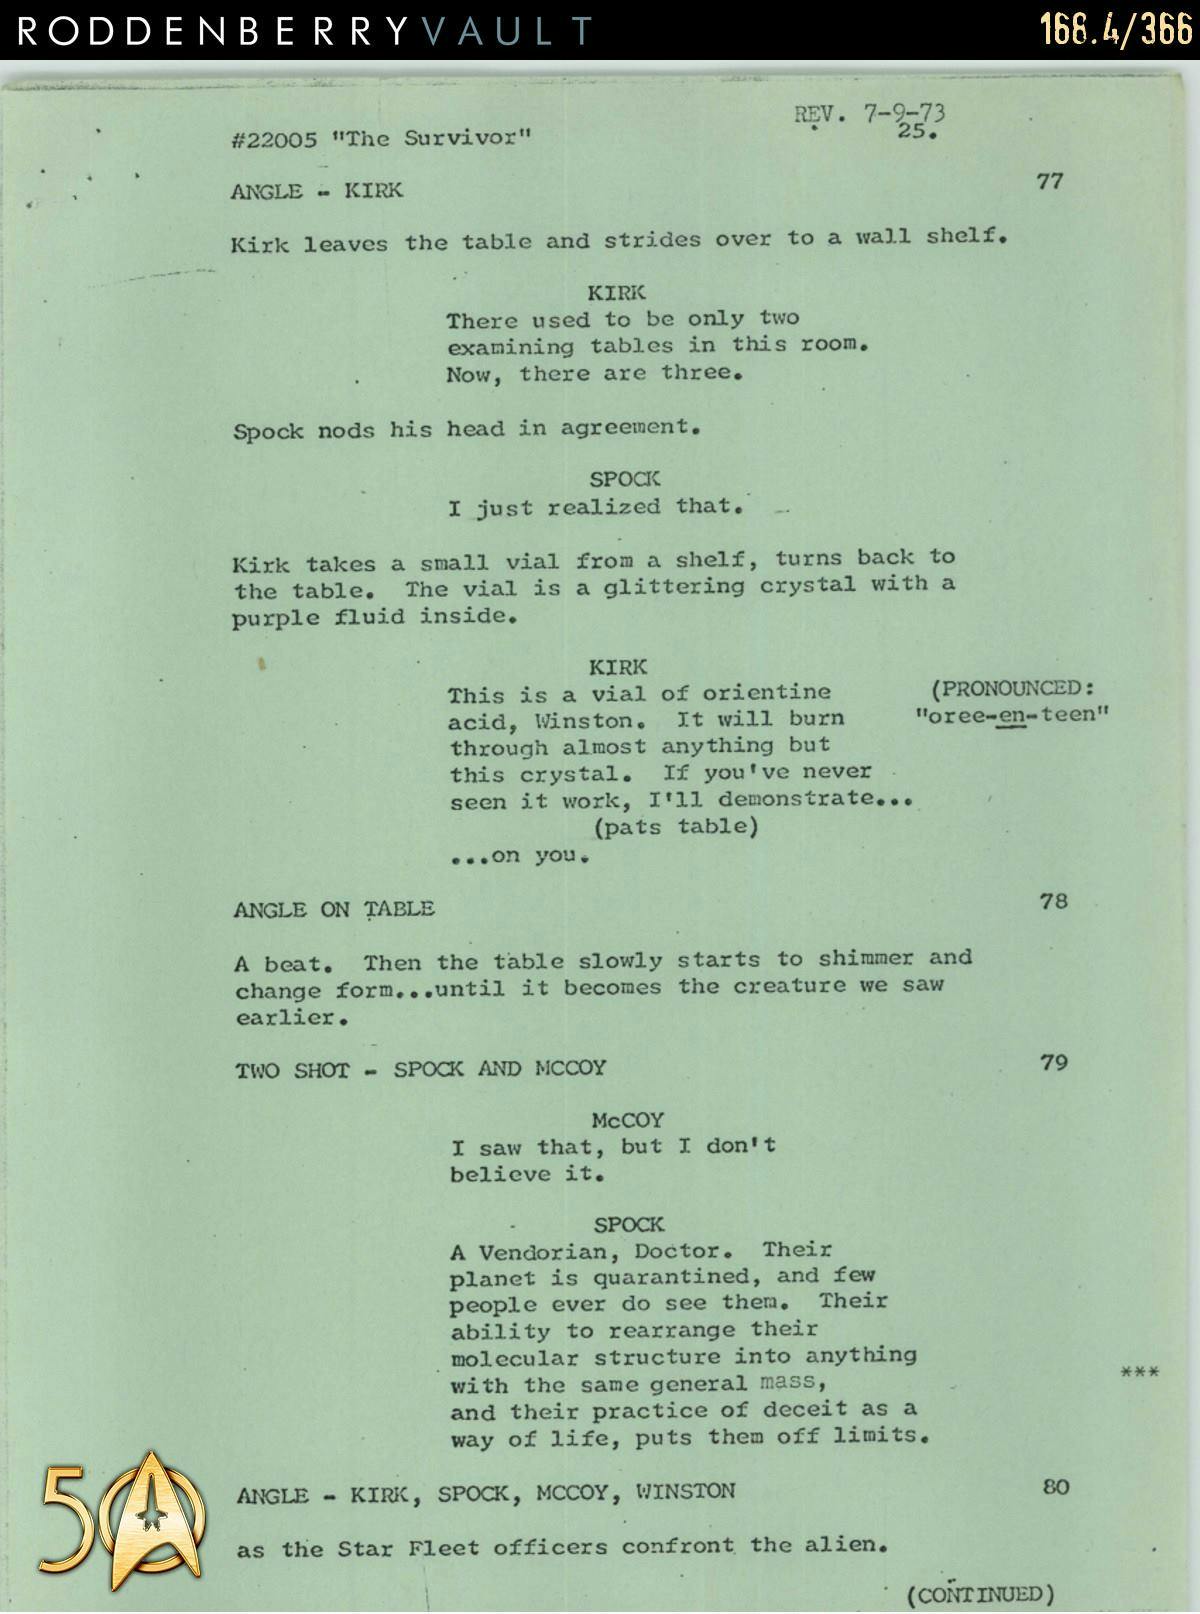 From the Roddenberry 366 Vault - The Animated Series - 'The Survivor' script